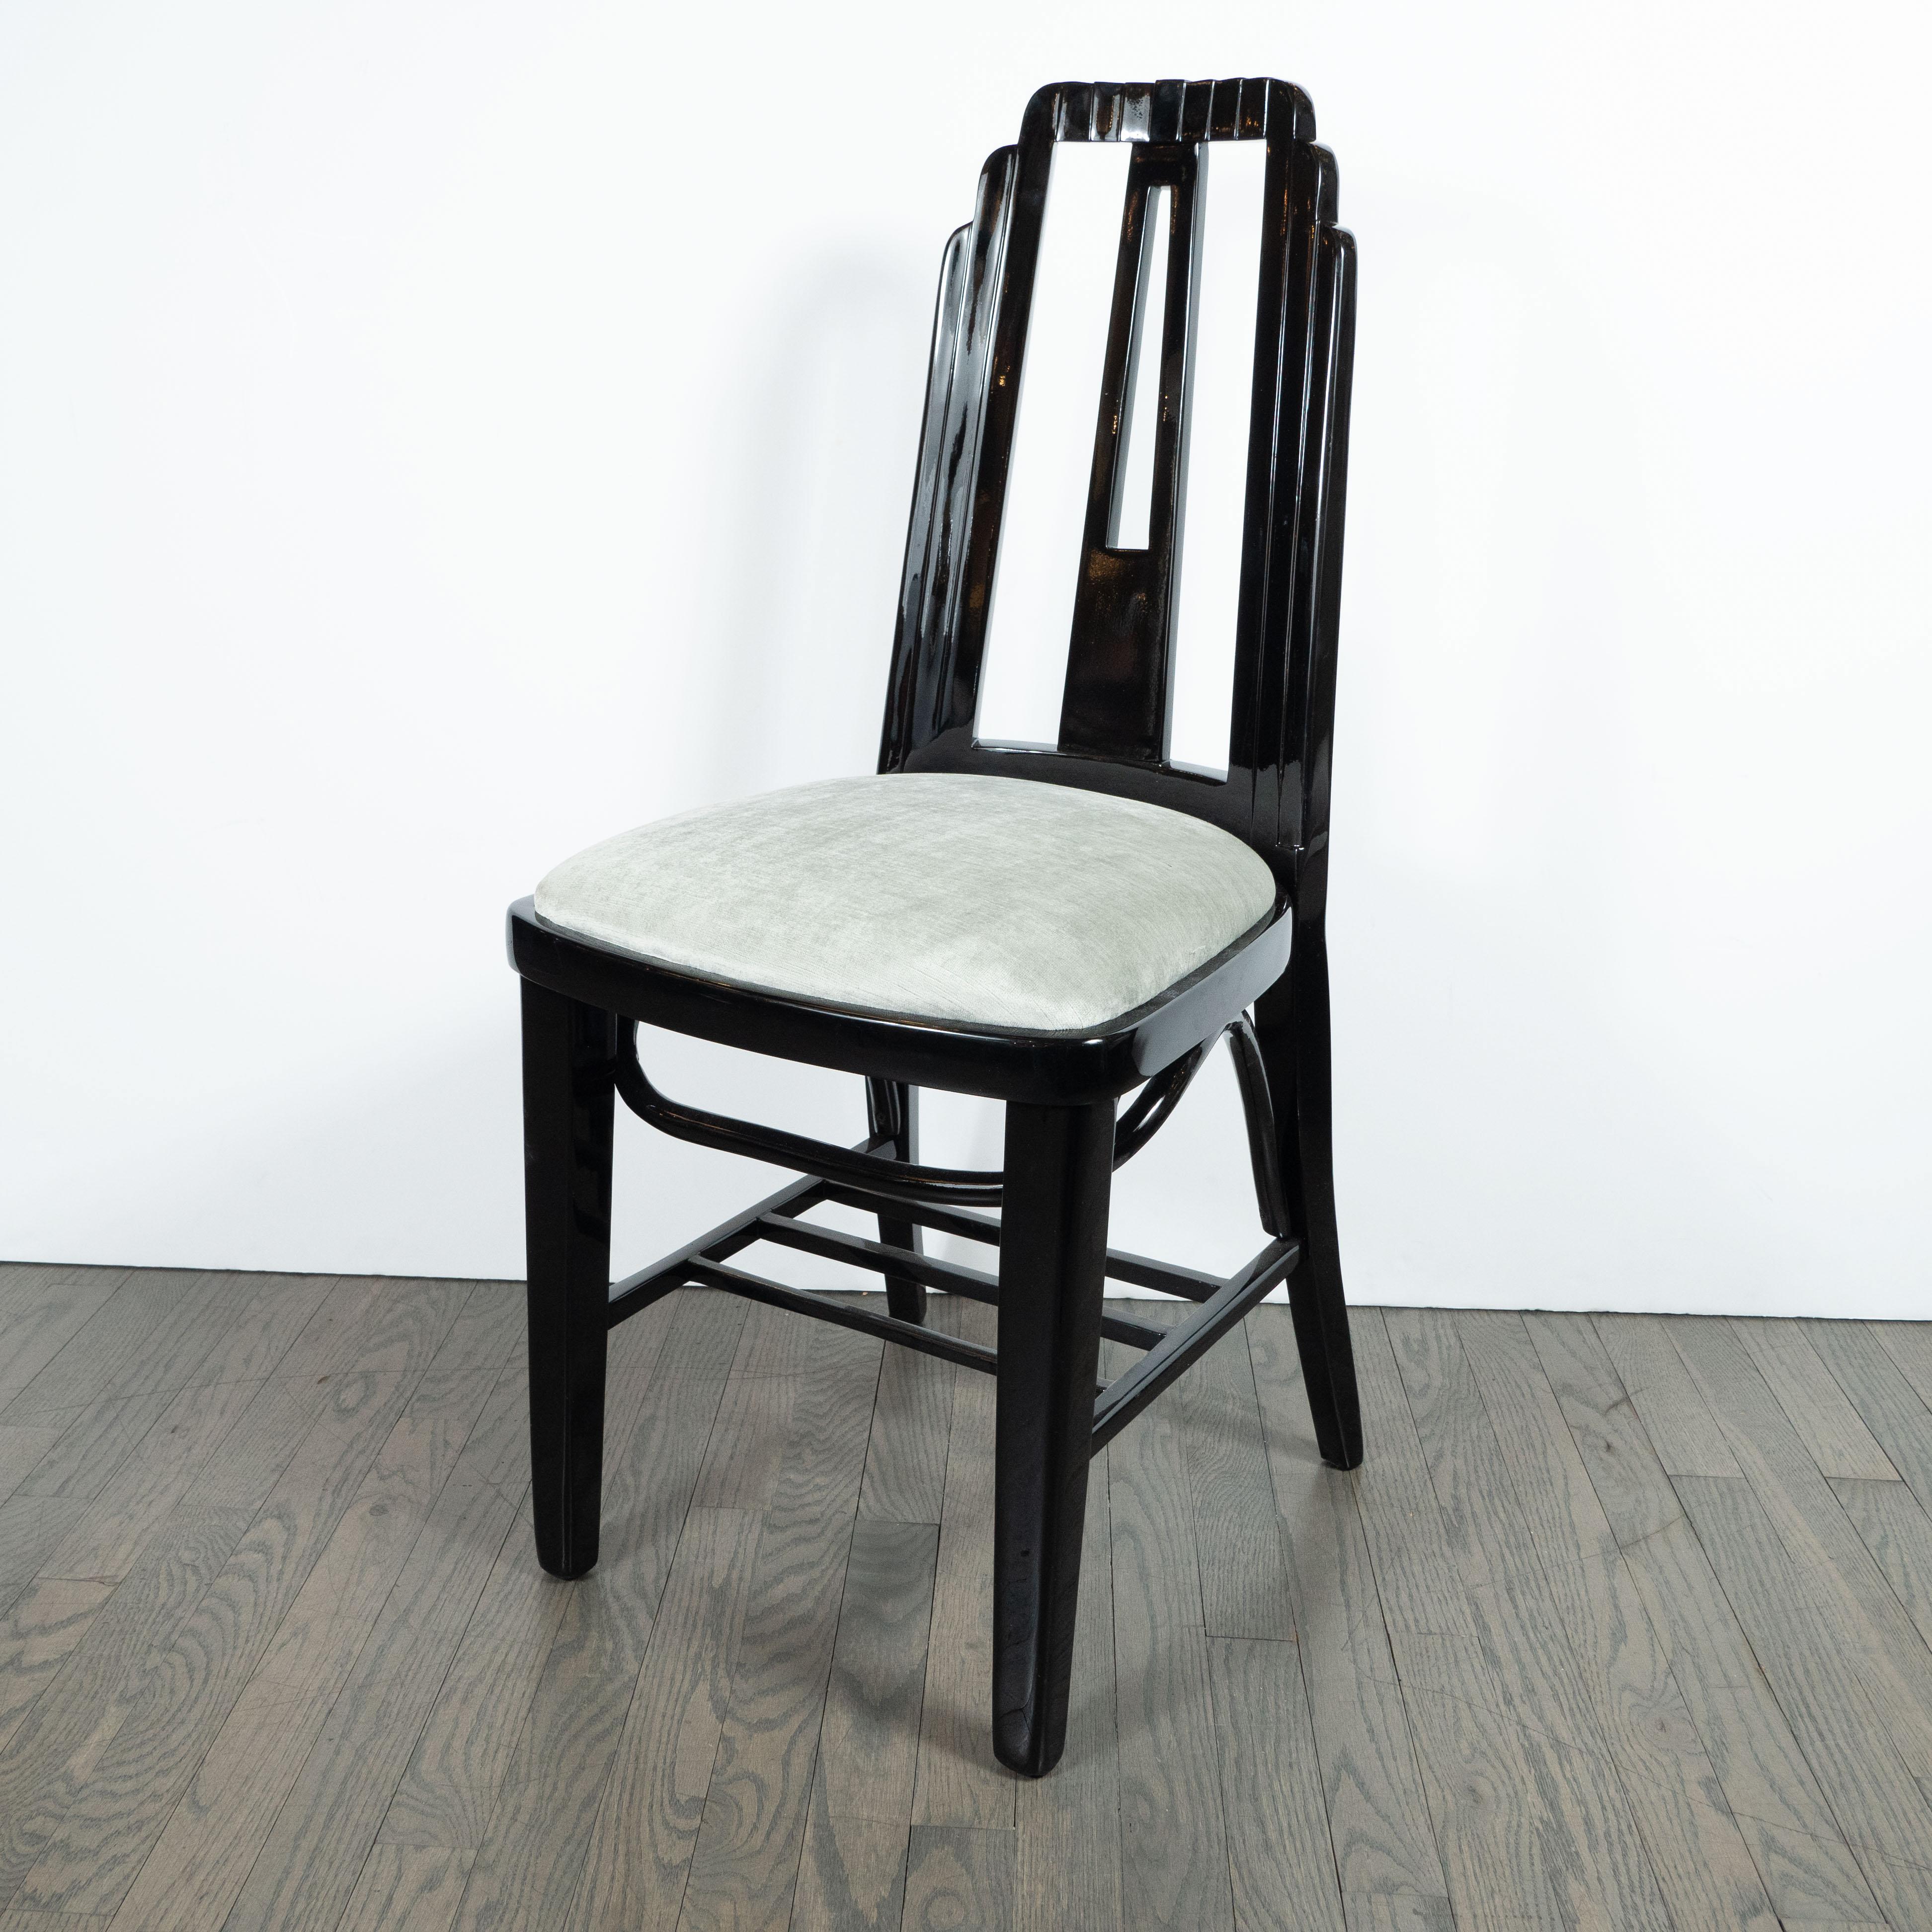 Art Deco Machine Age Black Lacquer Skyscraper Style Occasional or Desk Chair In Excellent Condition For Sale In New York, NY